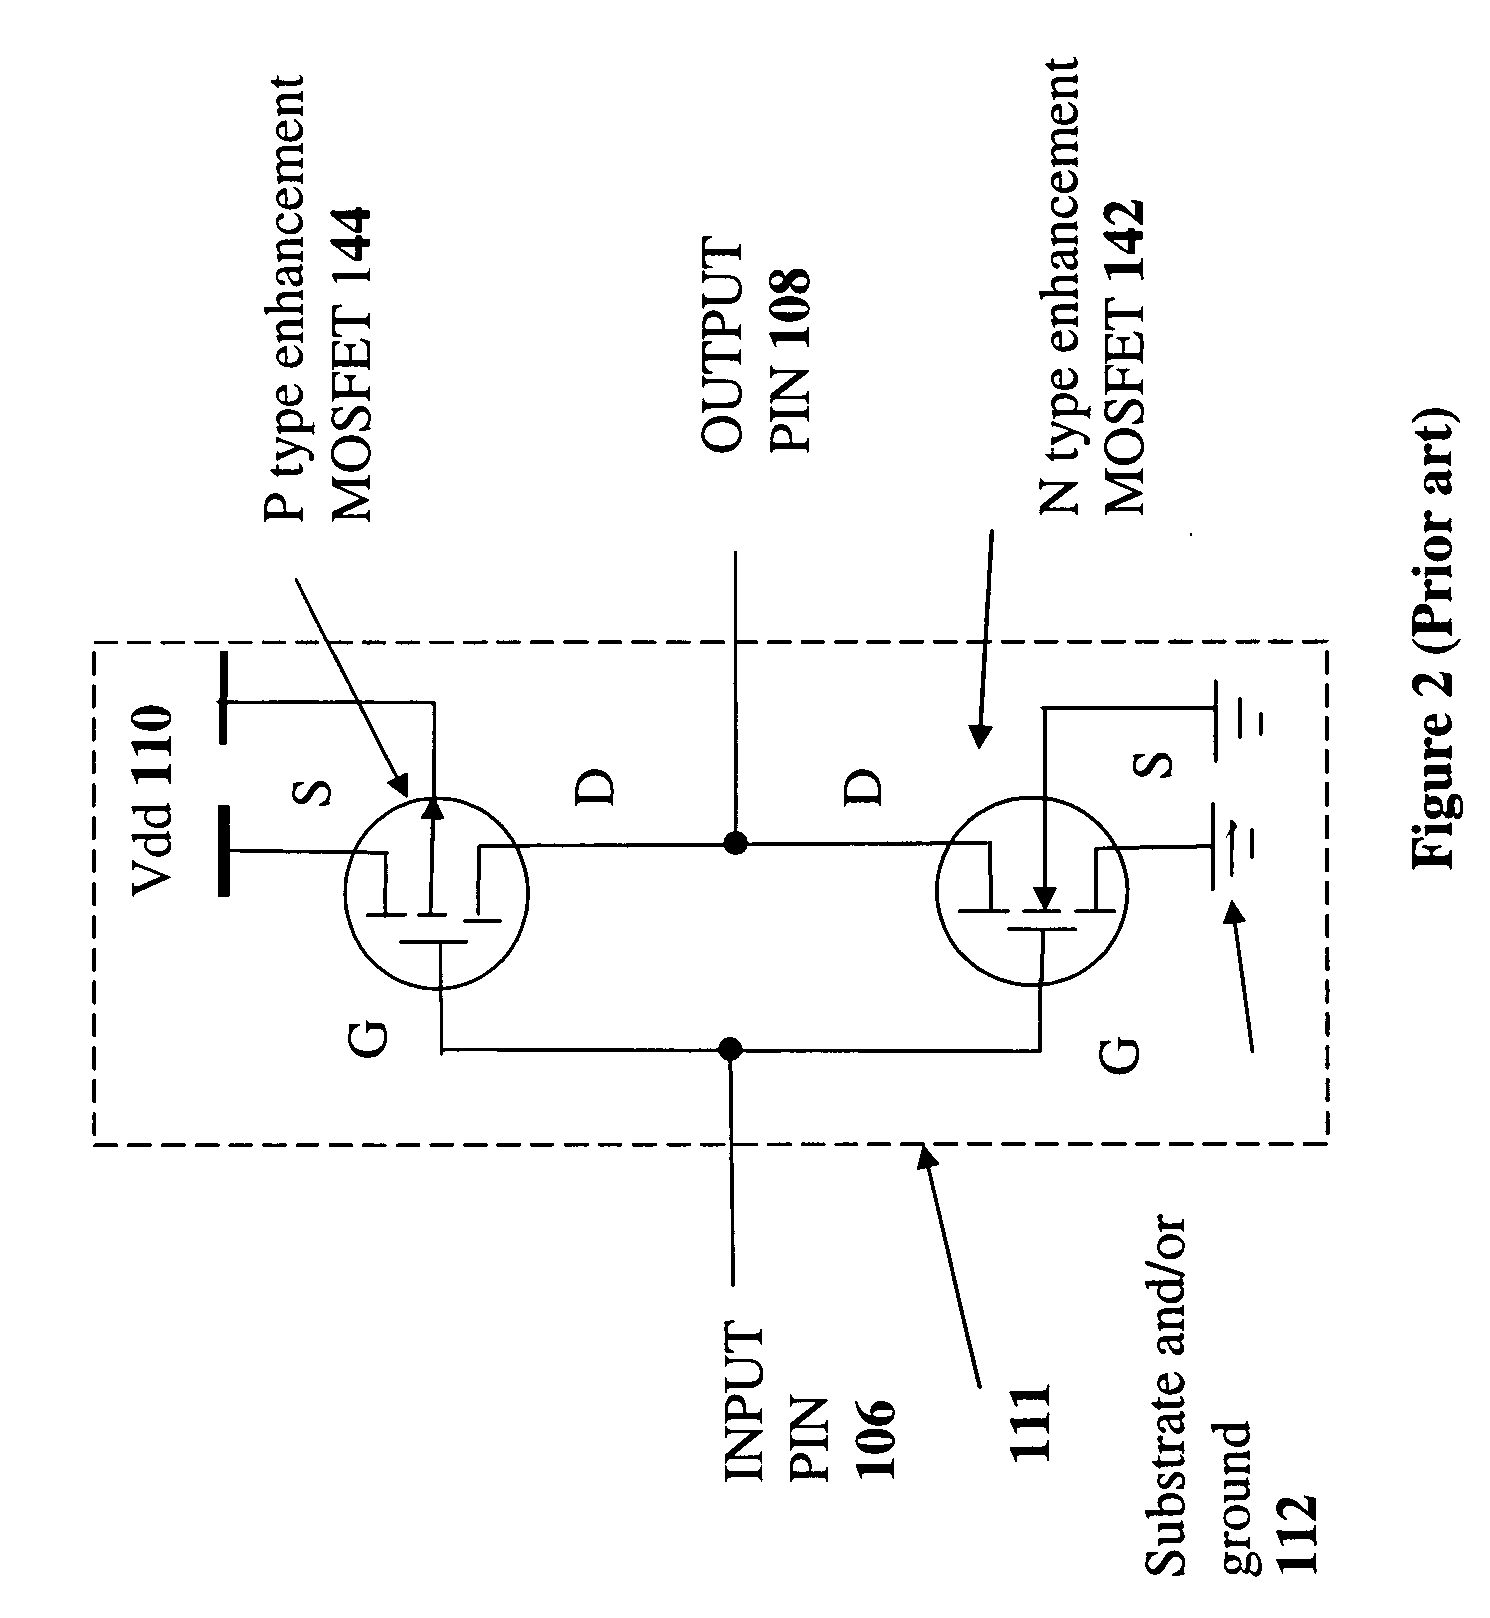 Depletion-mode mosfet circuit and applications